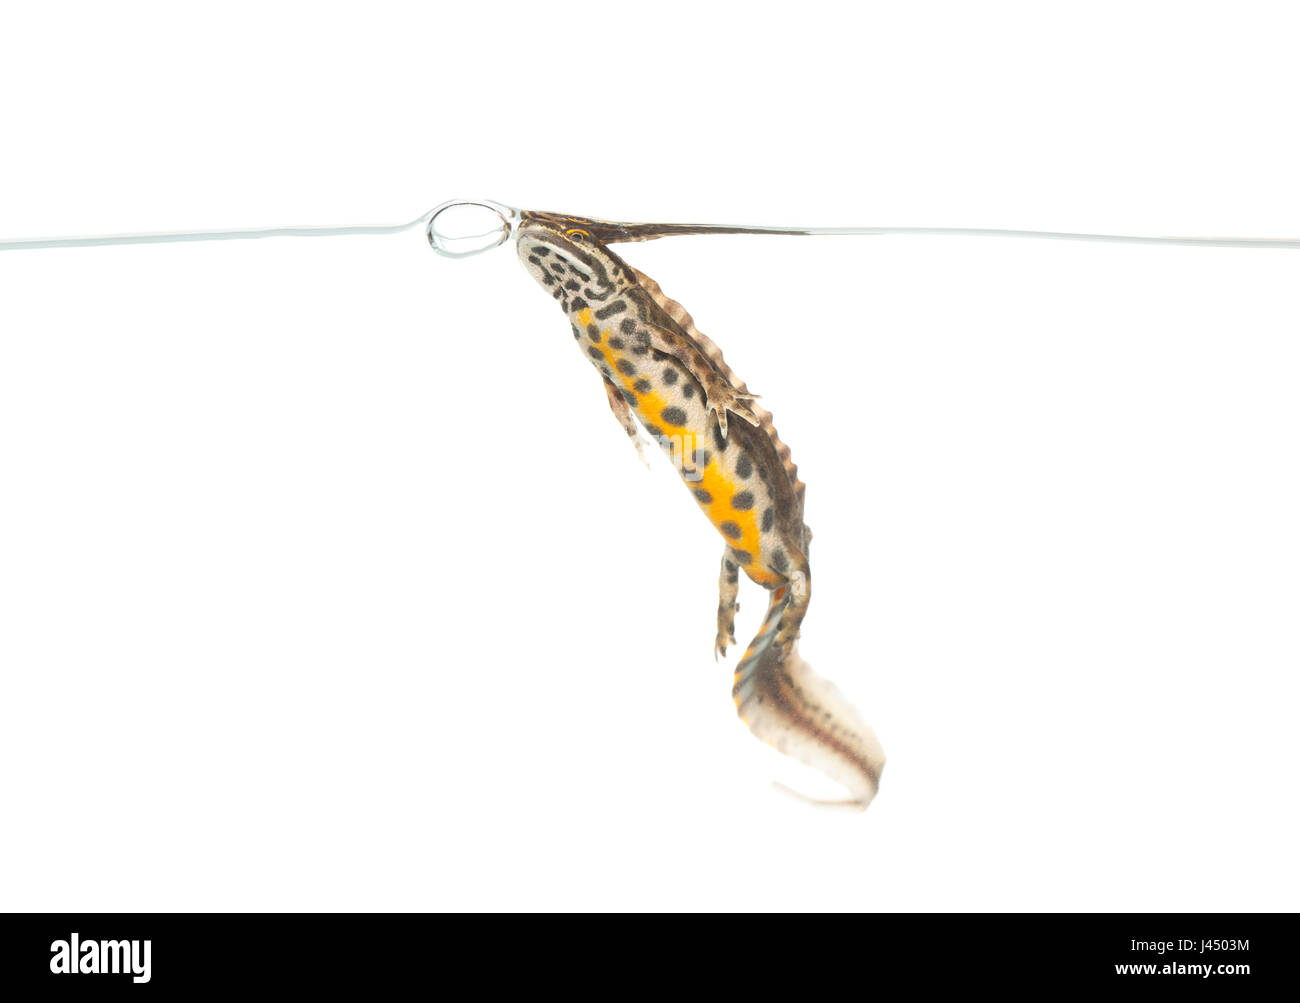 photo of a male common newt (Lissotriton vulgaris) against a white background Stock Photo